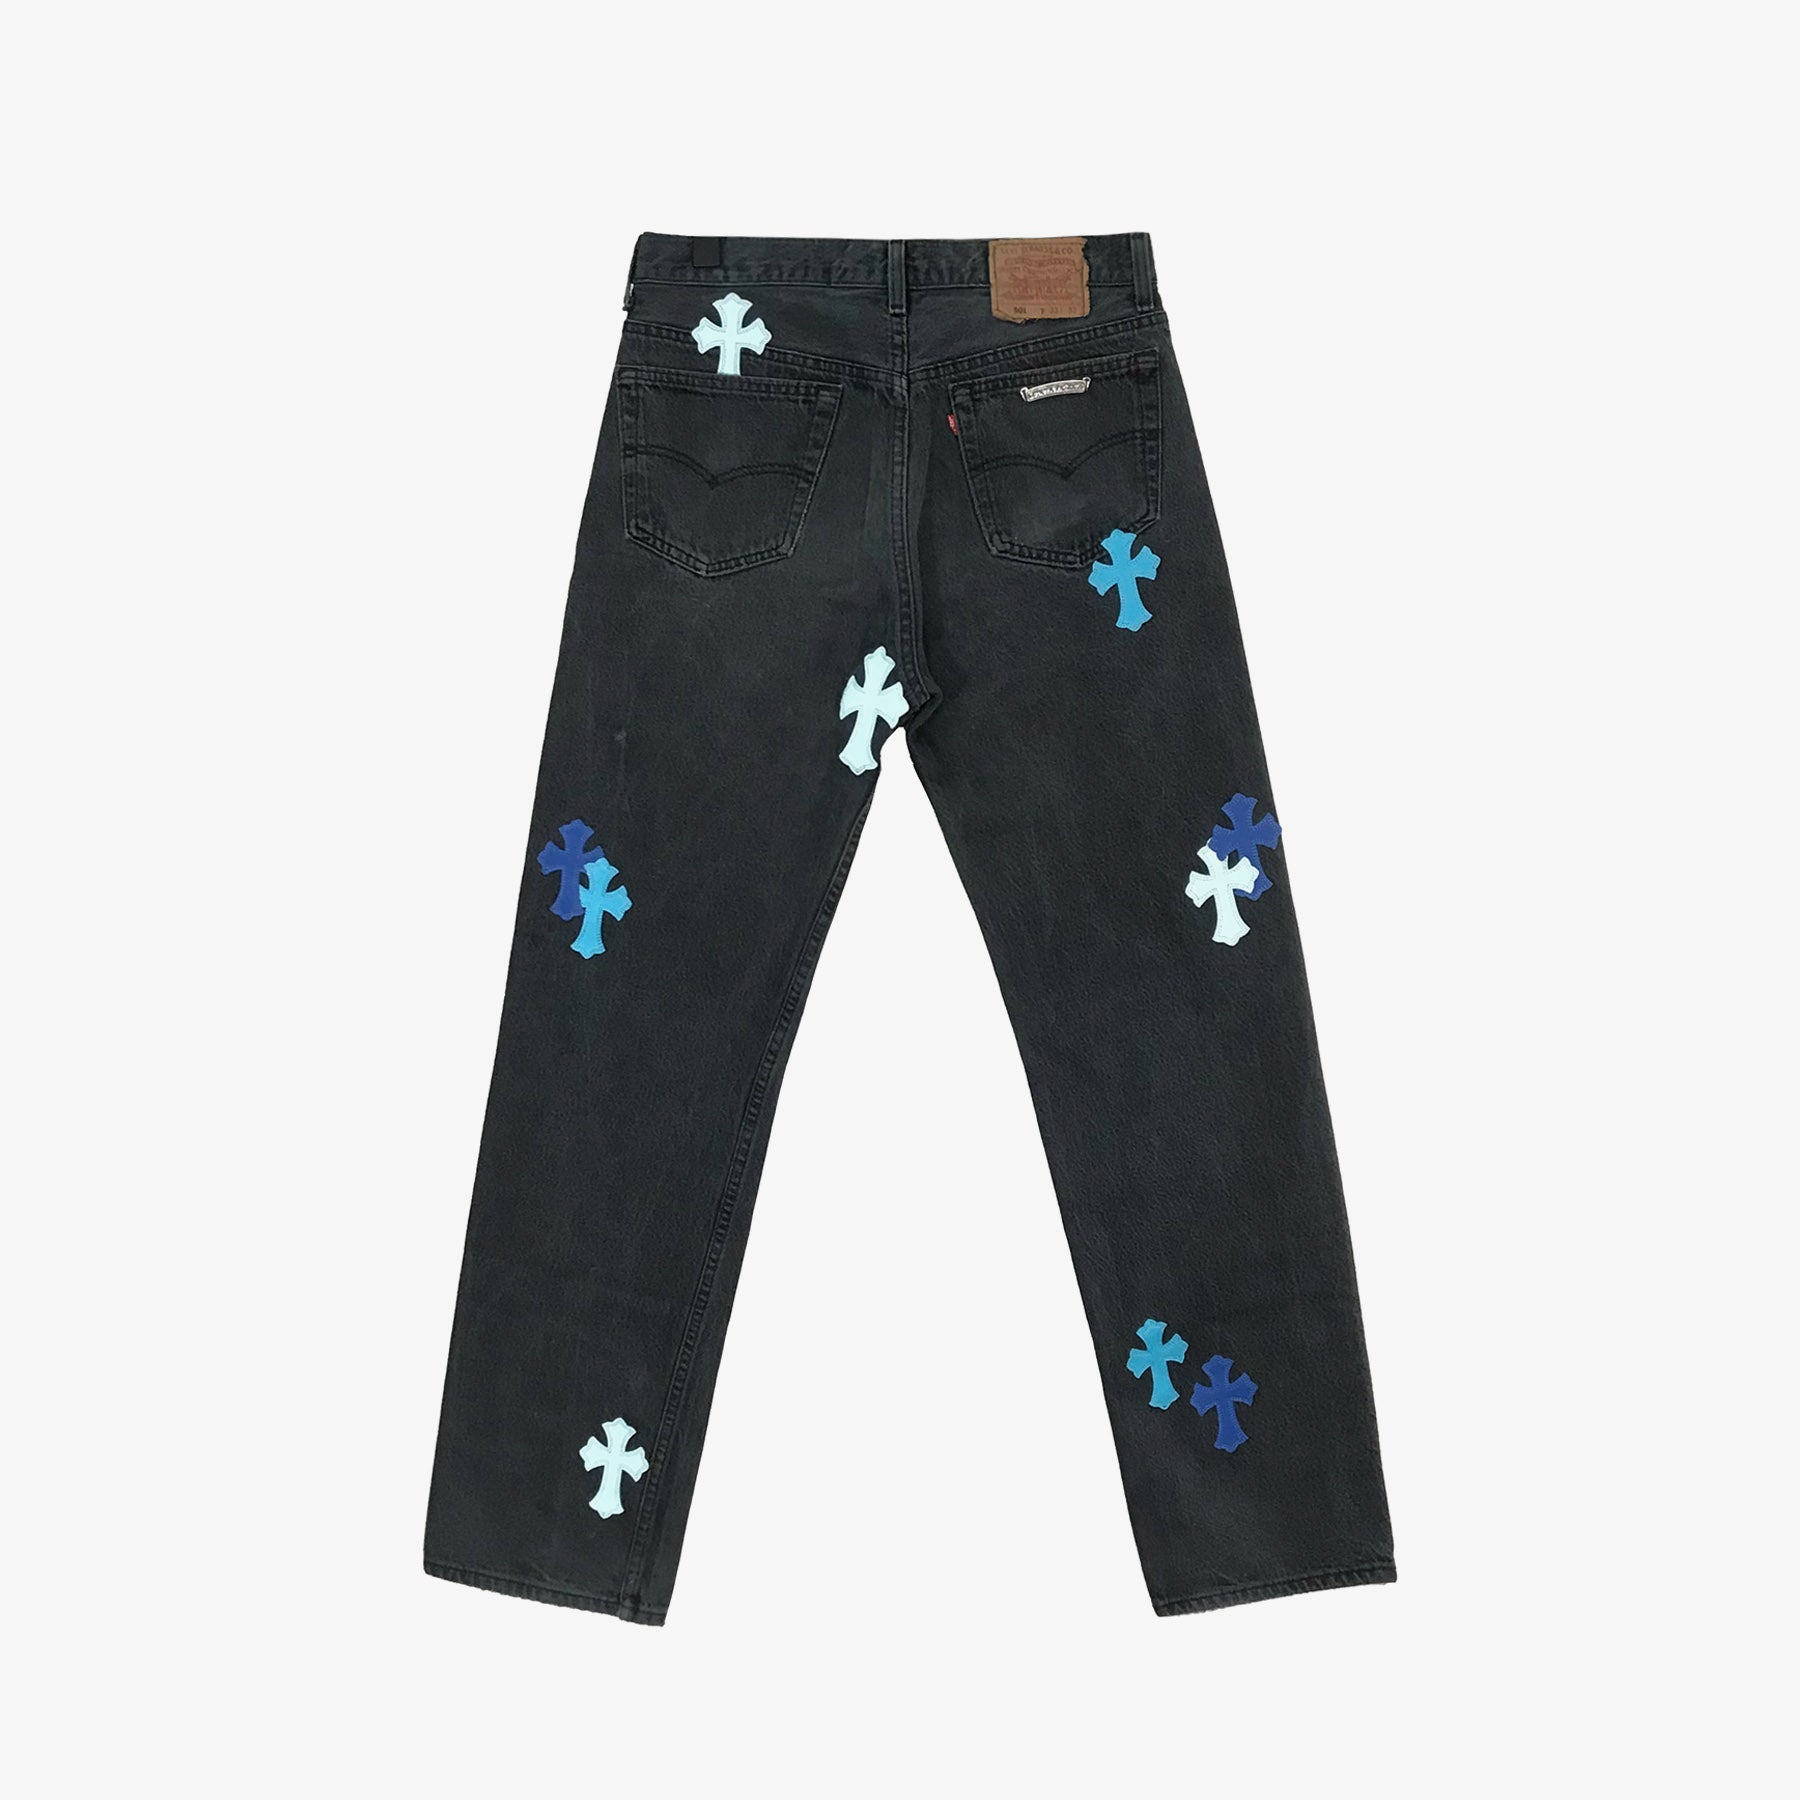 Chrome Hearts London Exclusive Jeans with Blue Leather Cross Patch - SHENGLI ROAD MARKET